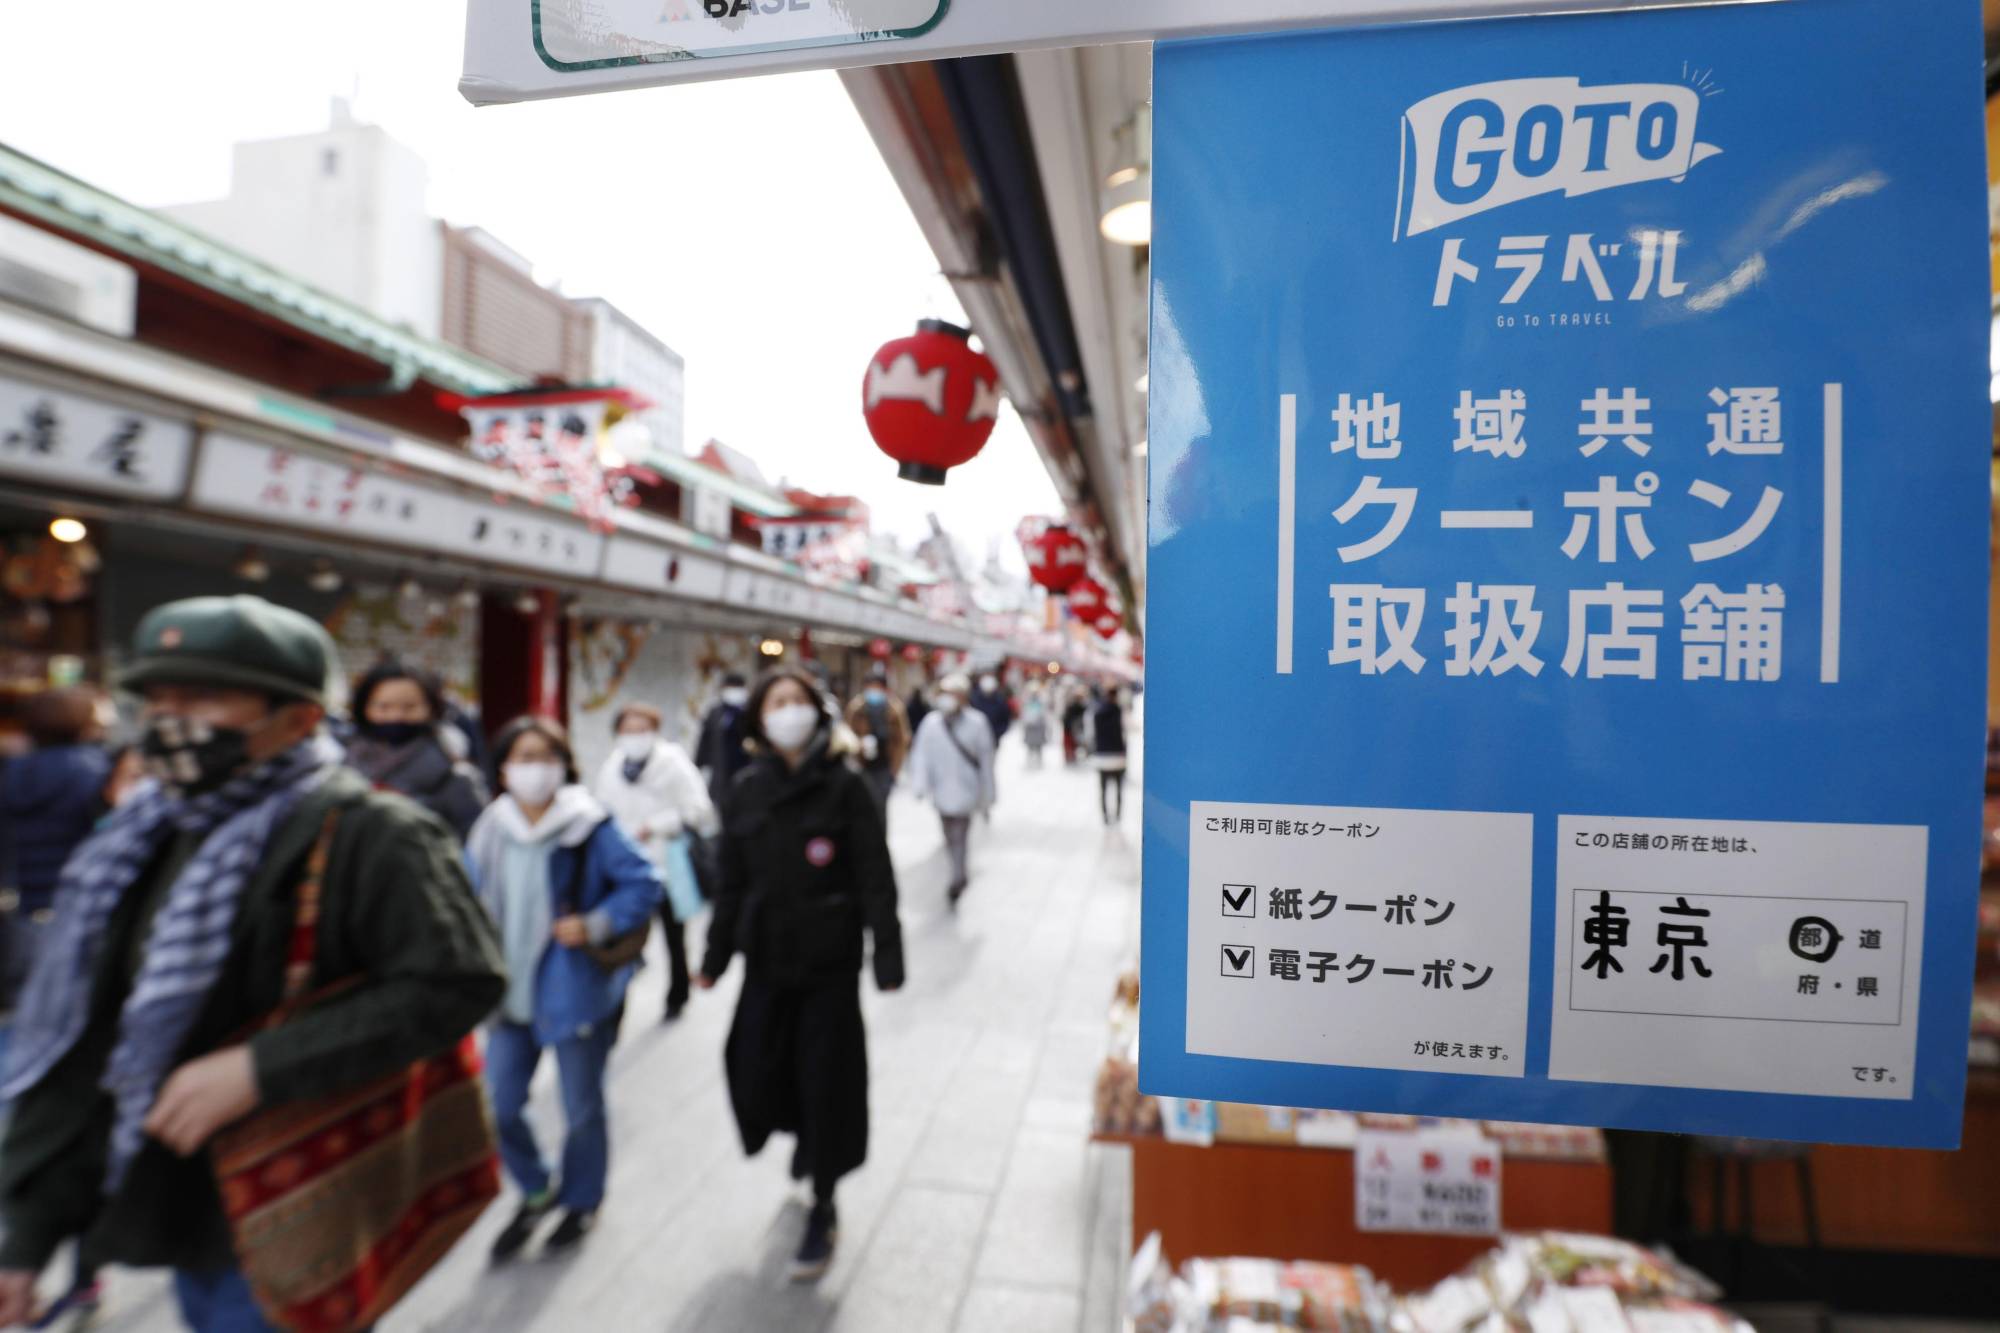 A sign promoting the government’s Go To Travel subsidy program is displayed in a shopping street in Tokyo’s Asakusa district in December 2020. | KYODO